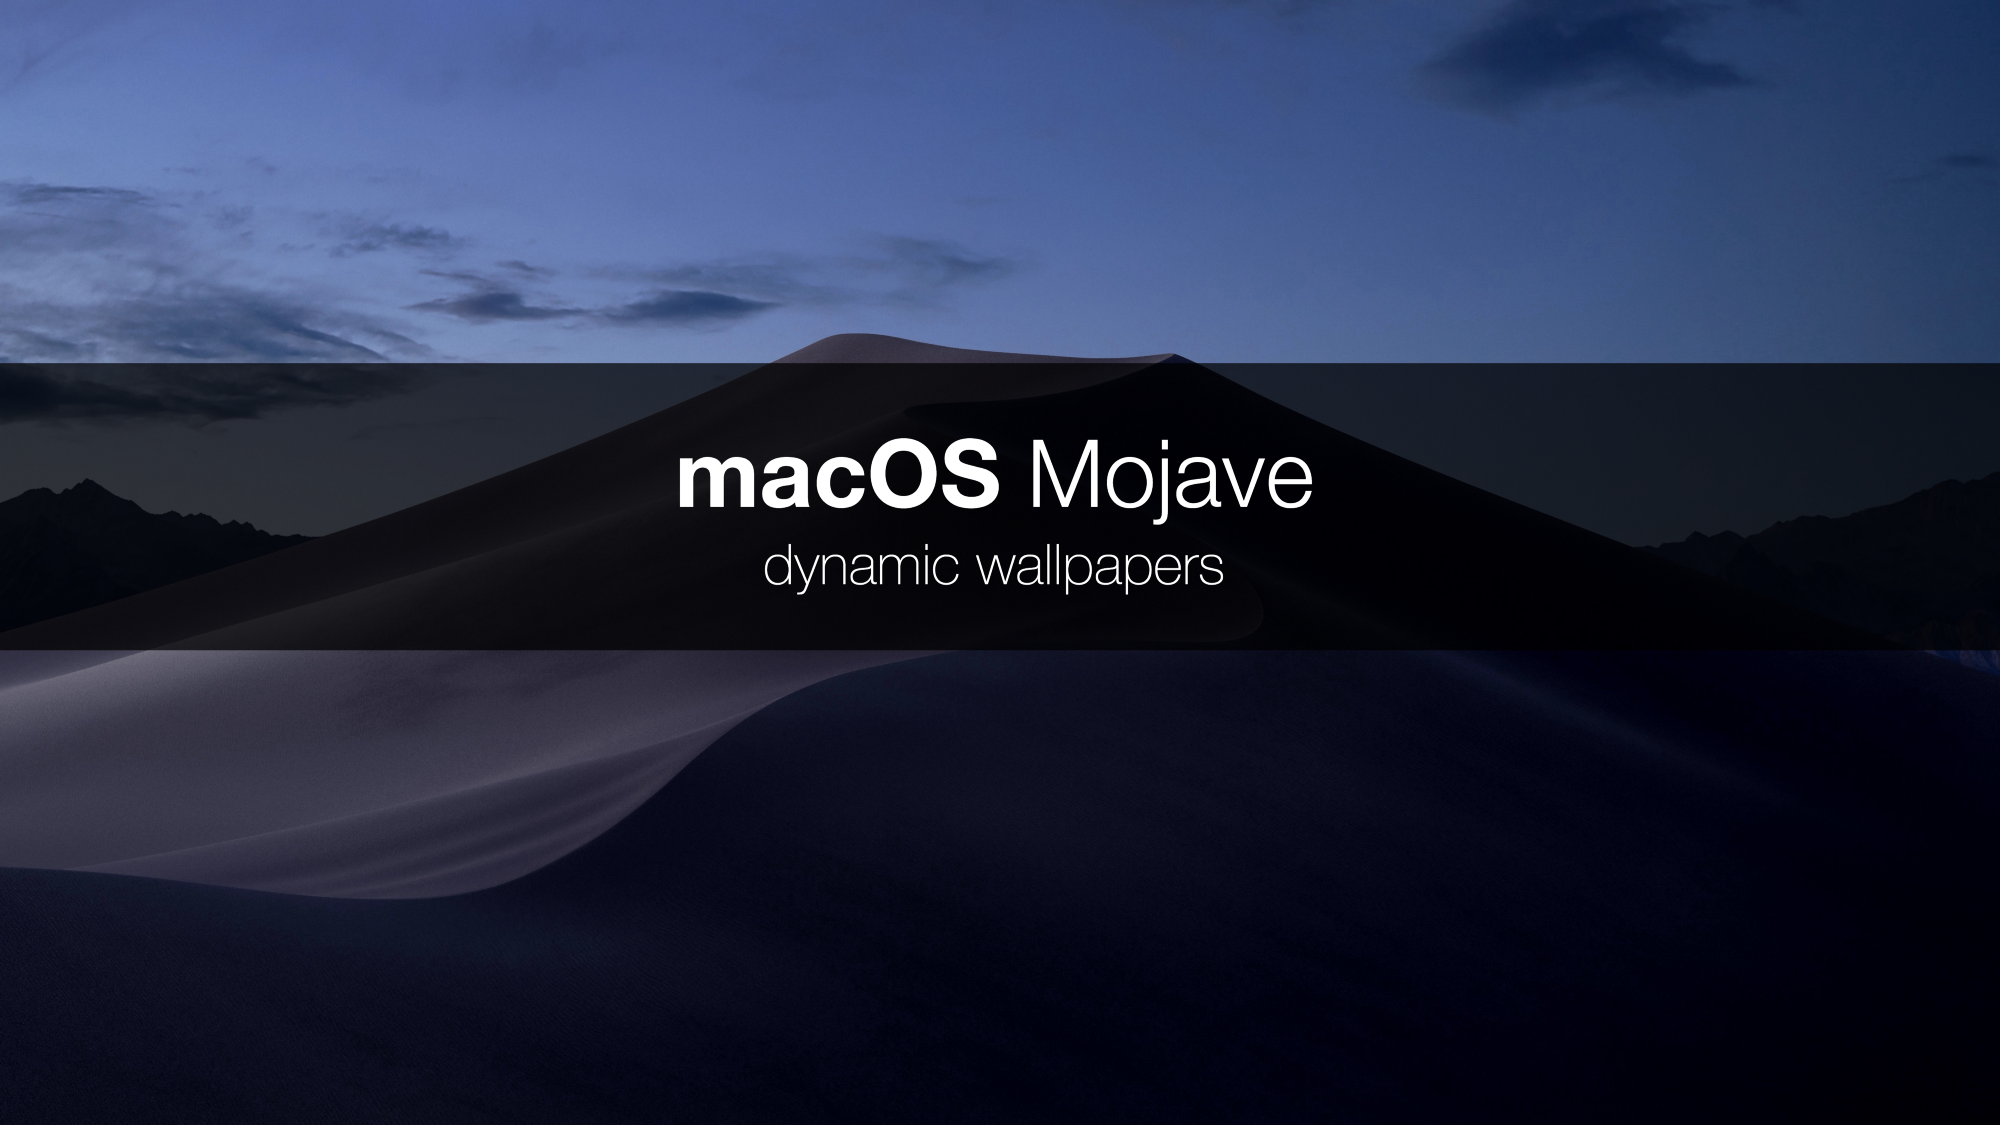 Create image of laptop for cloning mac mojave 2017